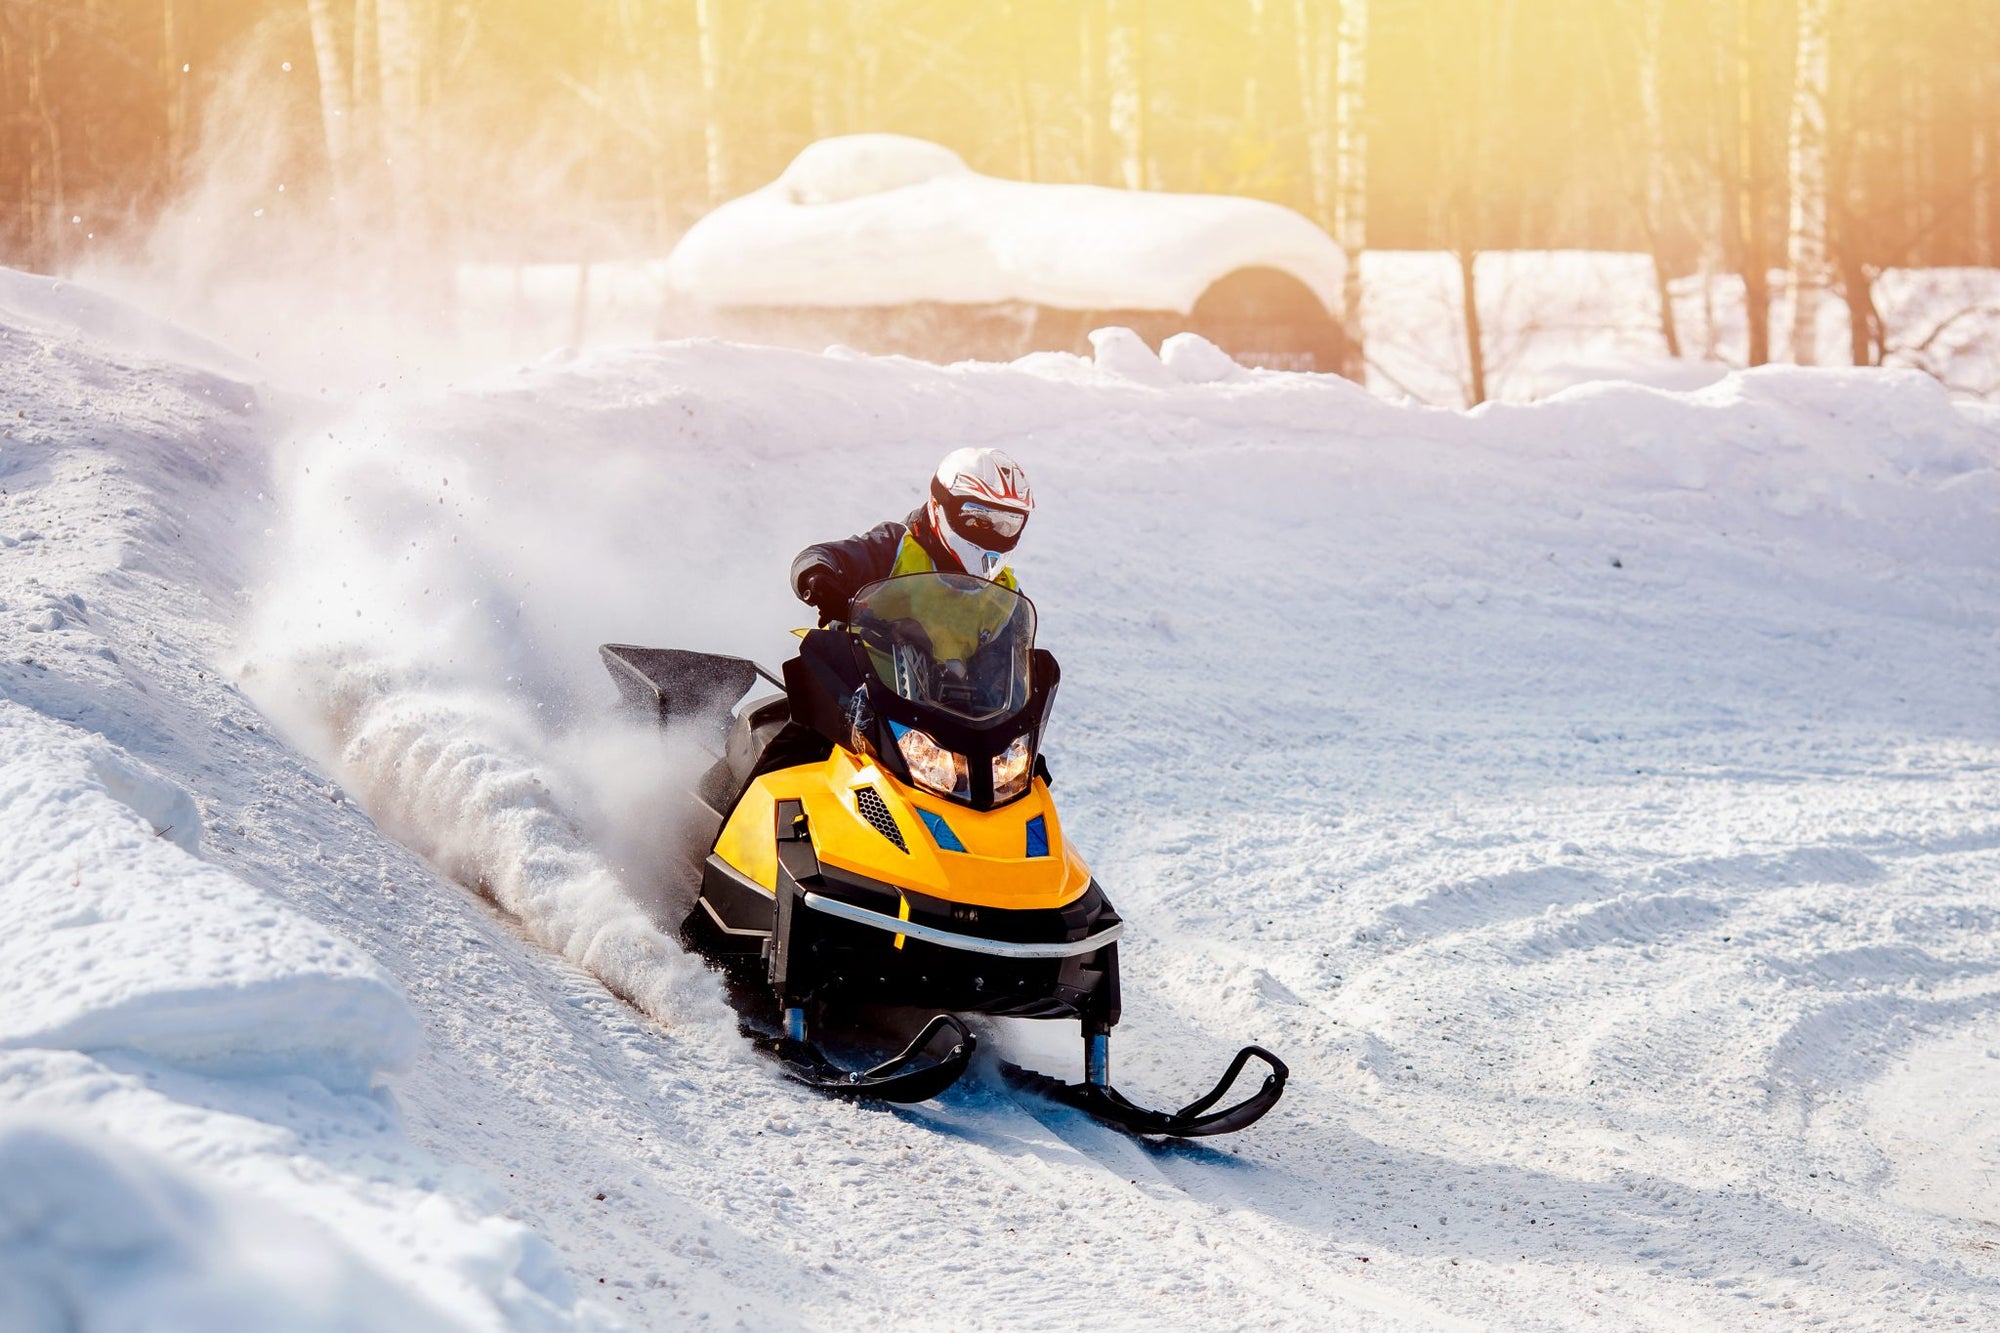 How Do I Get Better at Snowmobiling?